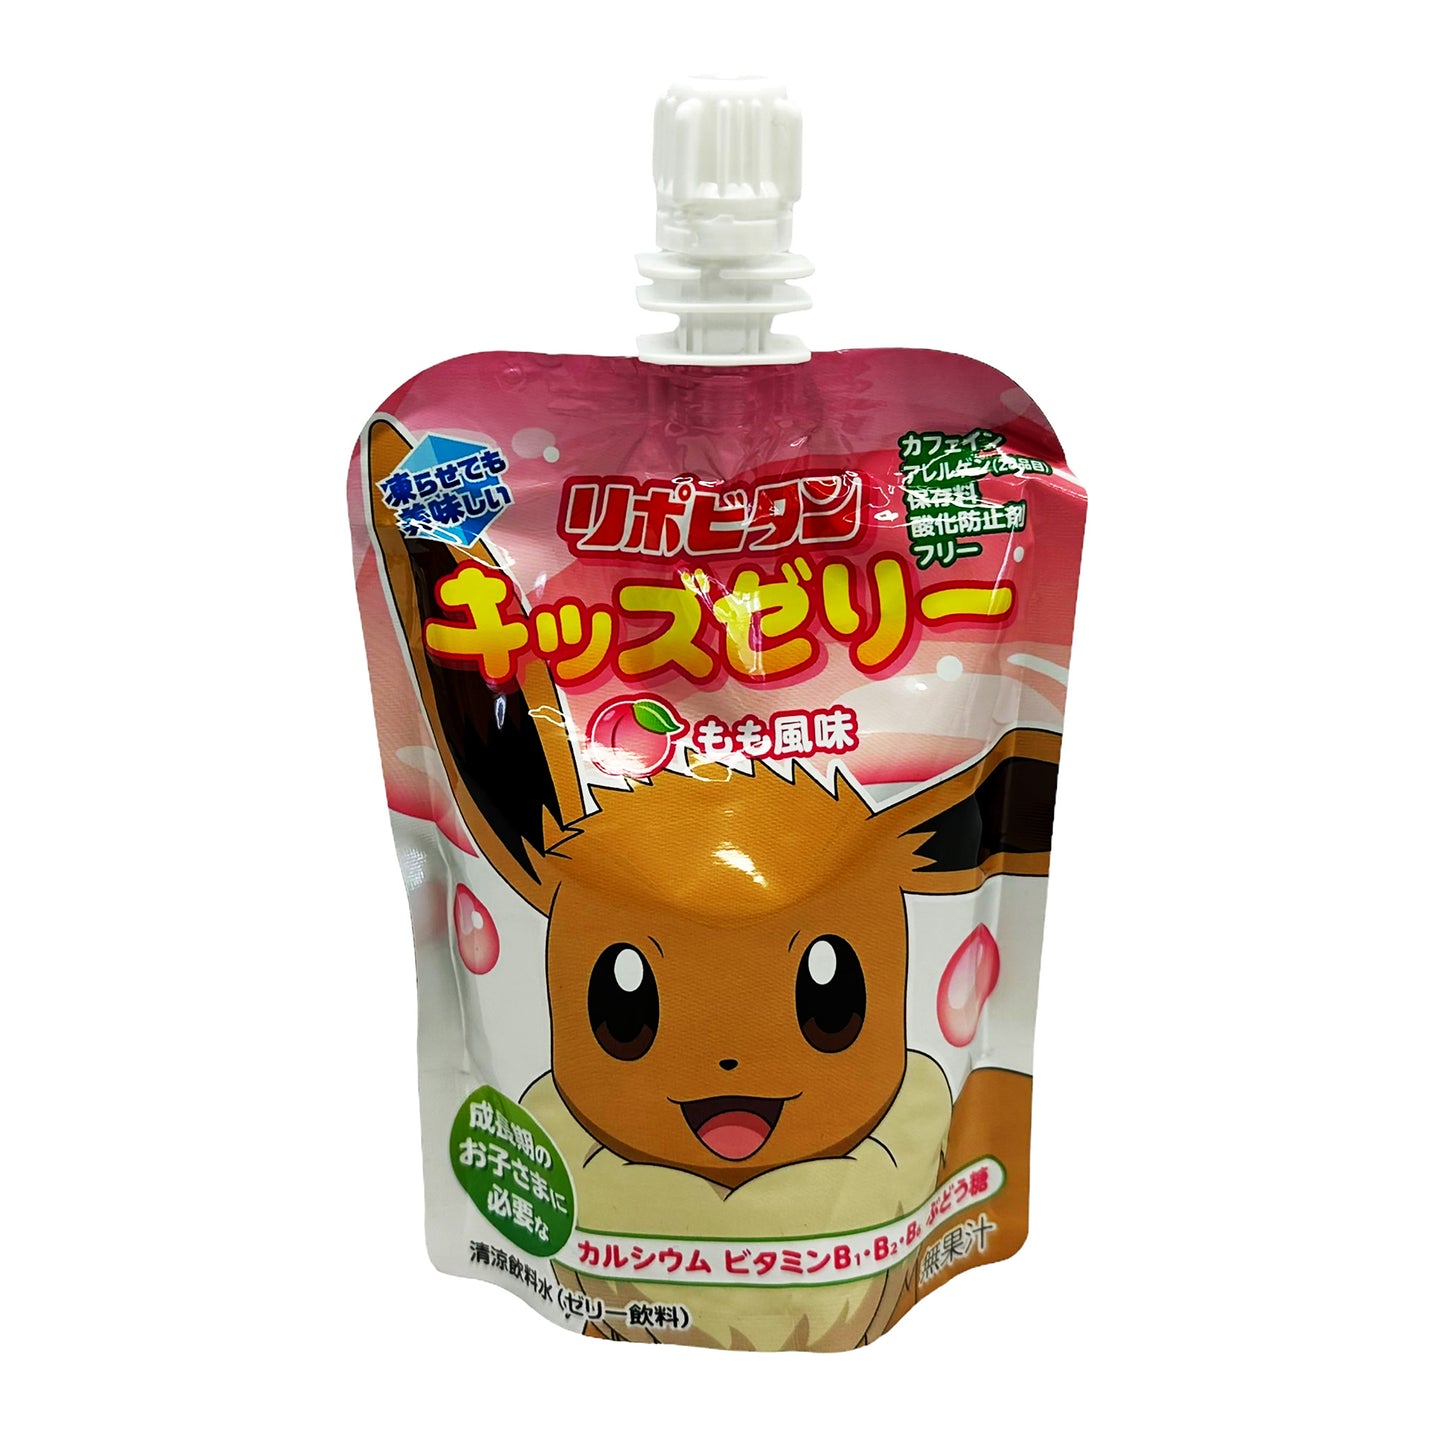 Front graphic image 1 of Taisho Pokemon Jelly Drink - Peach 4.4oz (125g)